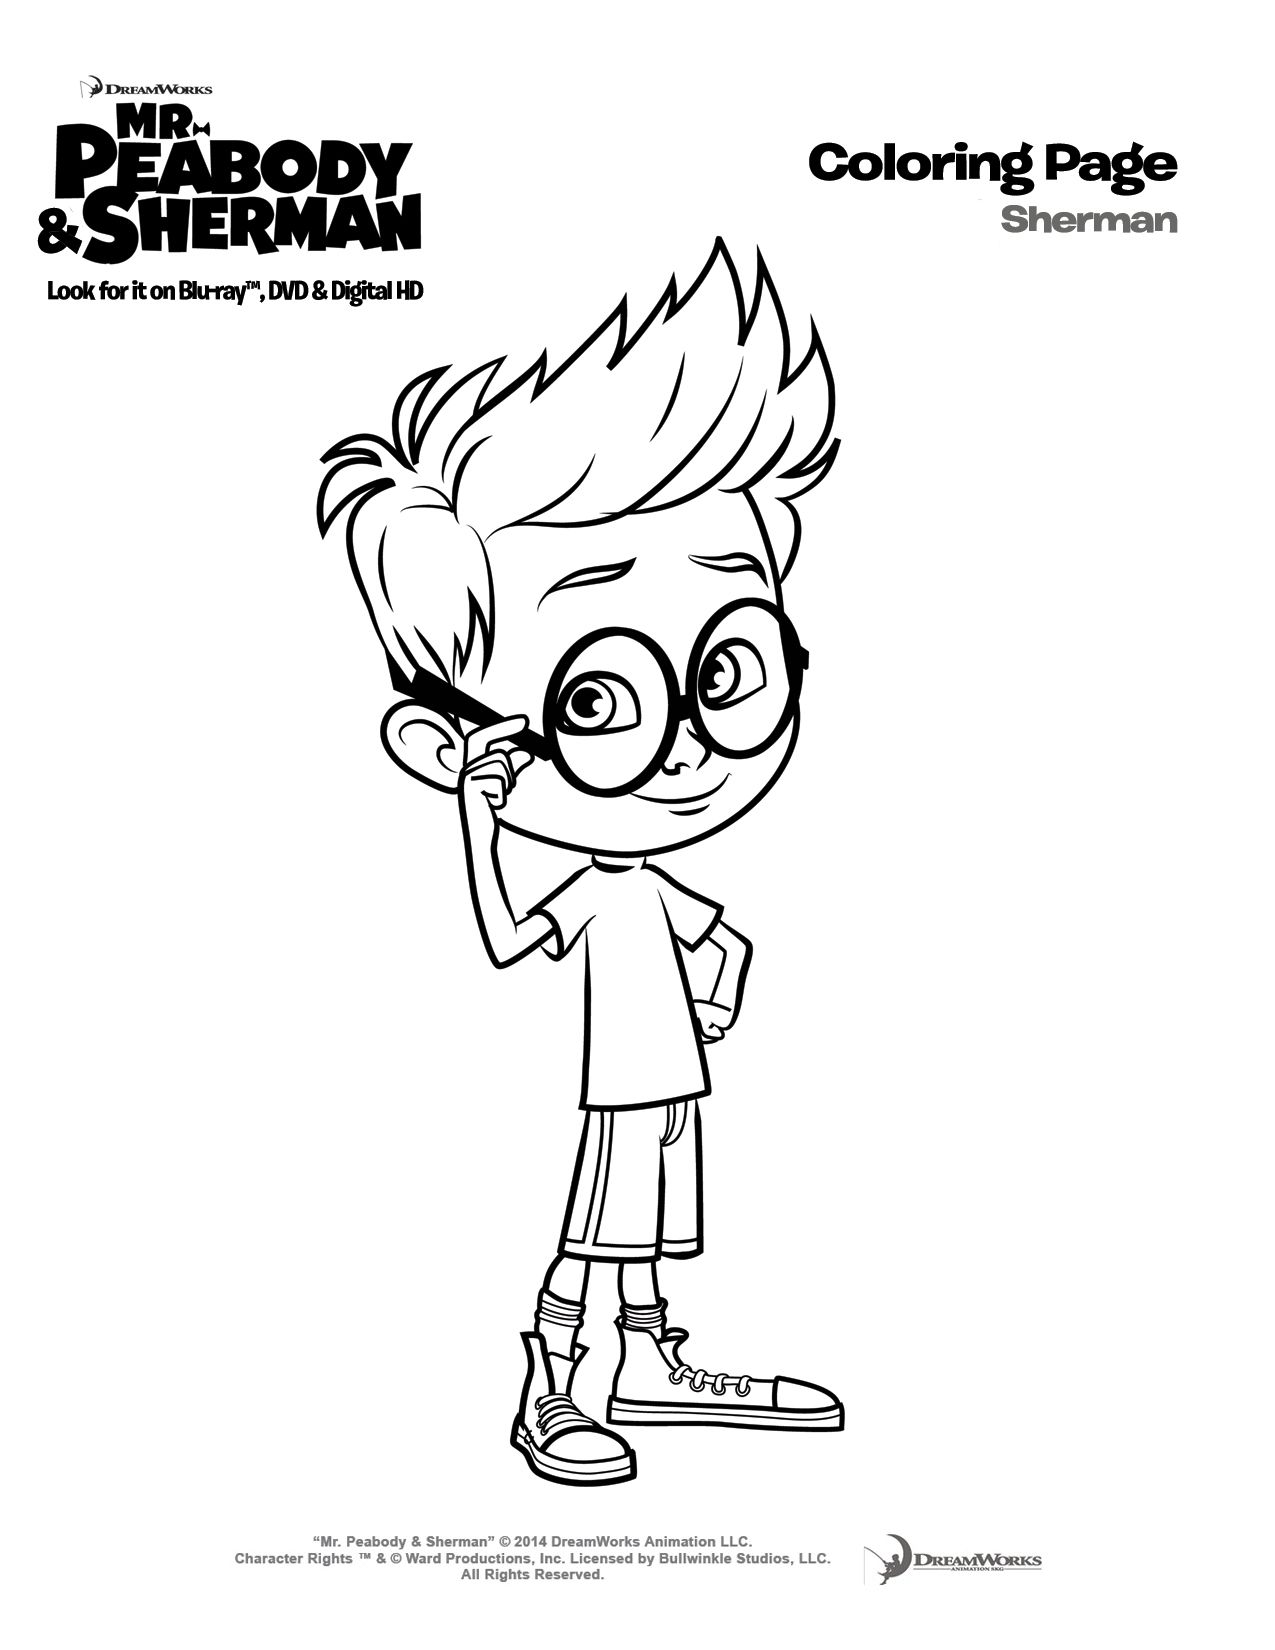 Free Coloring Pages Mr. Peabody & Sherman #PeabodyInsiders